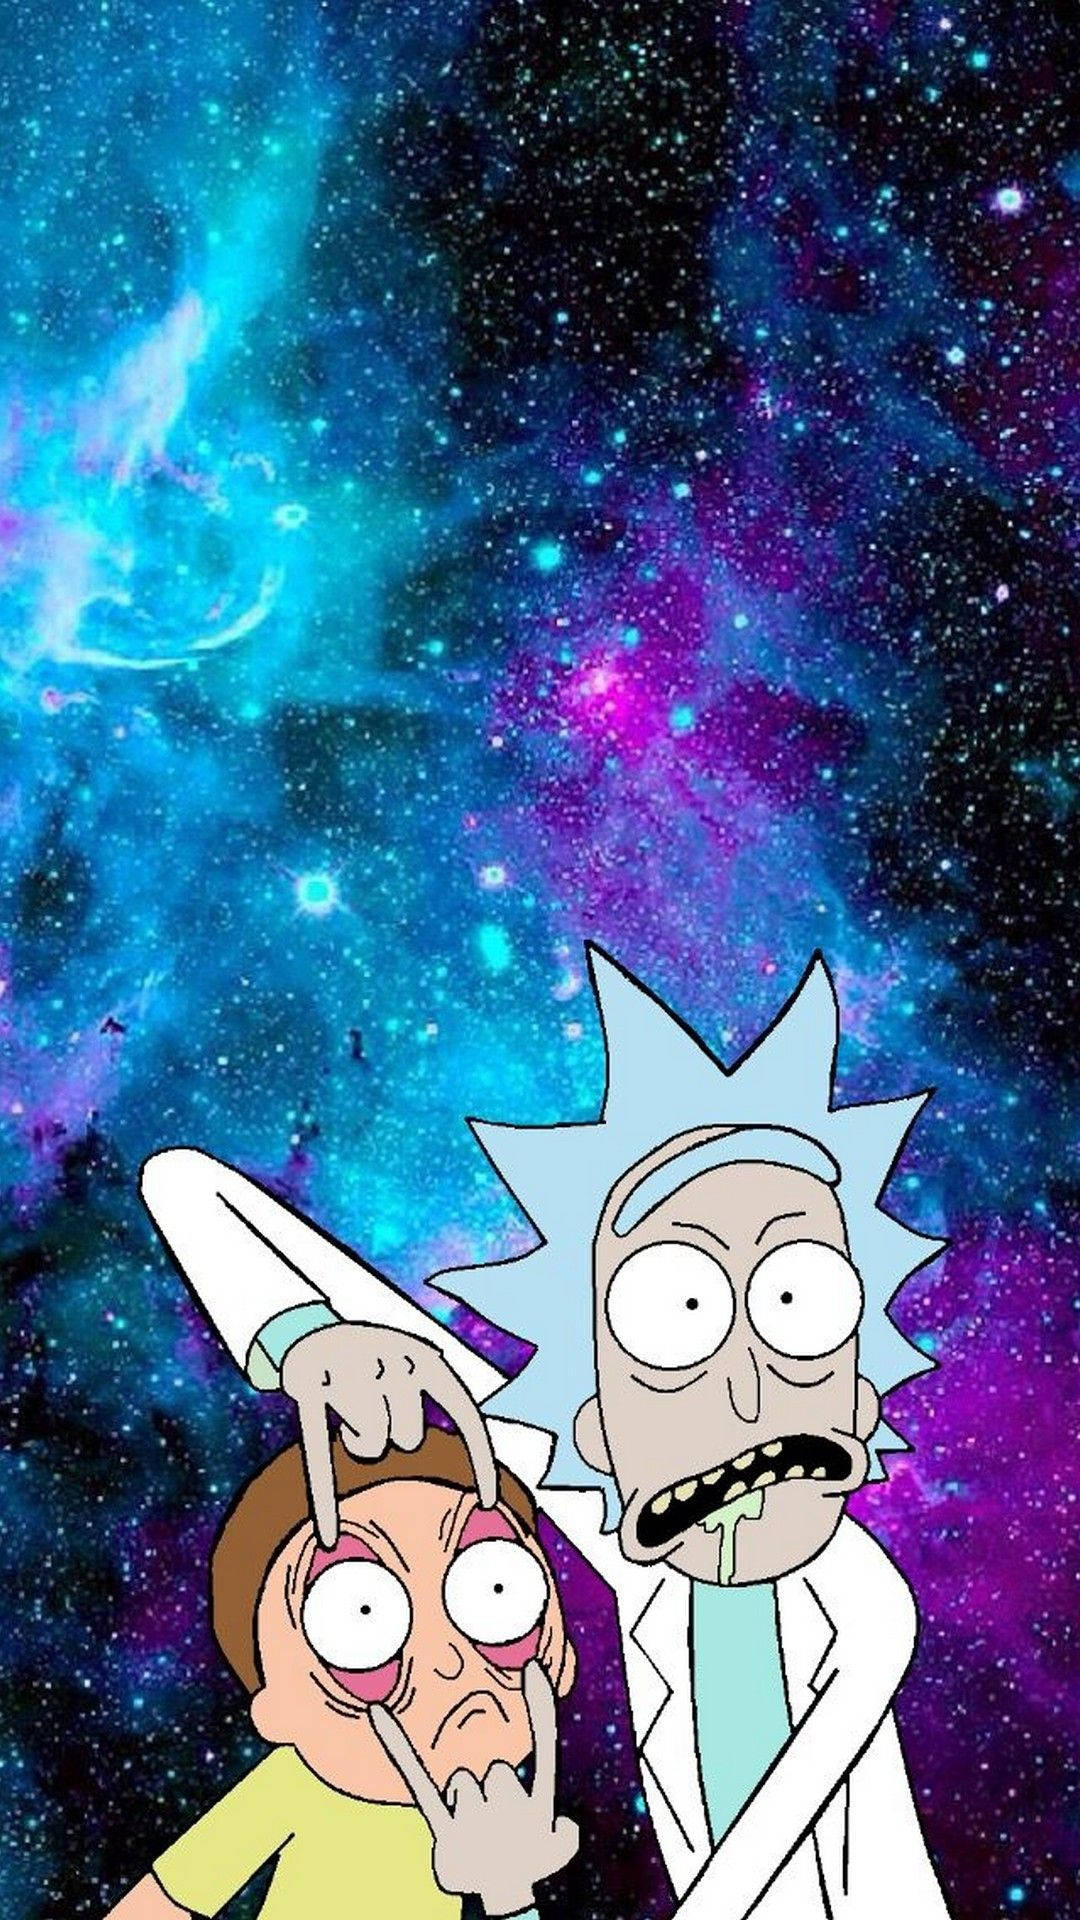 3840x2160] Rick and Morty in a Portal : r/wallpaper, rick and